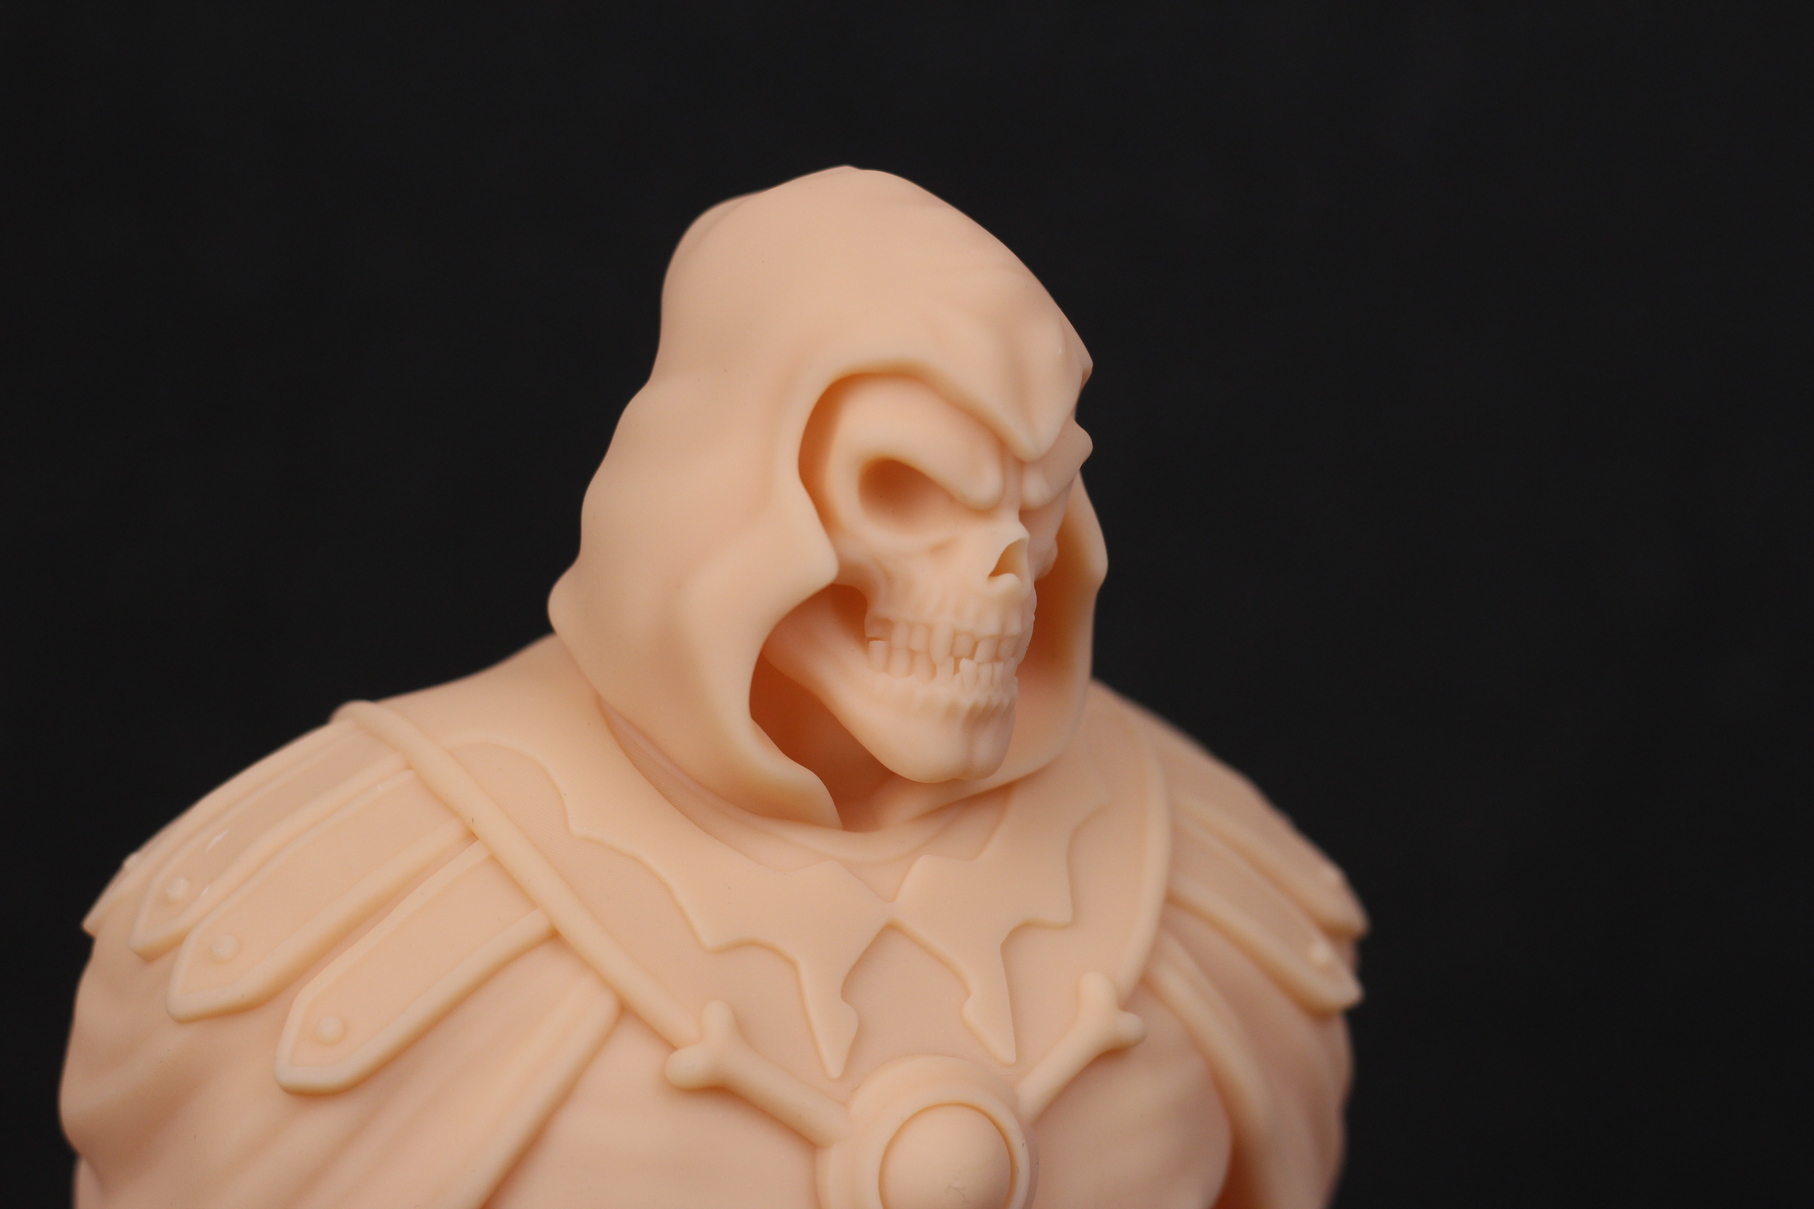 Skeletor Bust Fotis Mint 3 | Creality HALOT SKY Review: Worthy of the Premium Price?